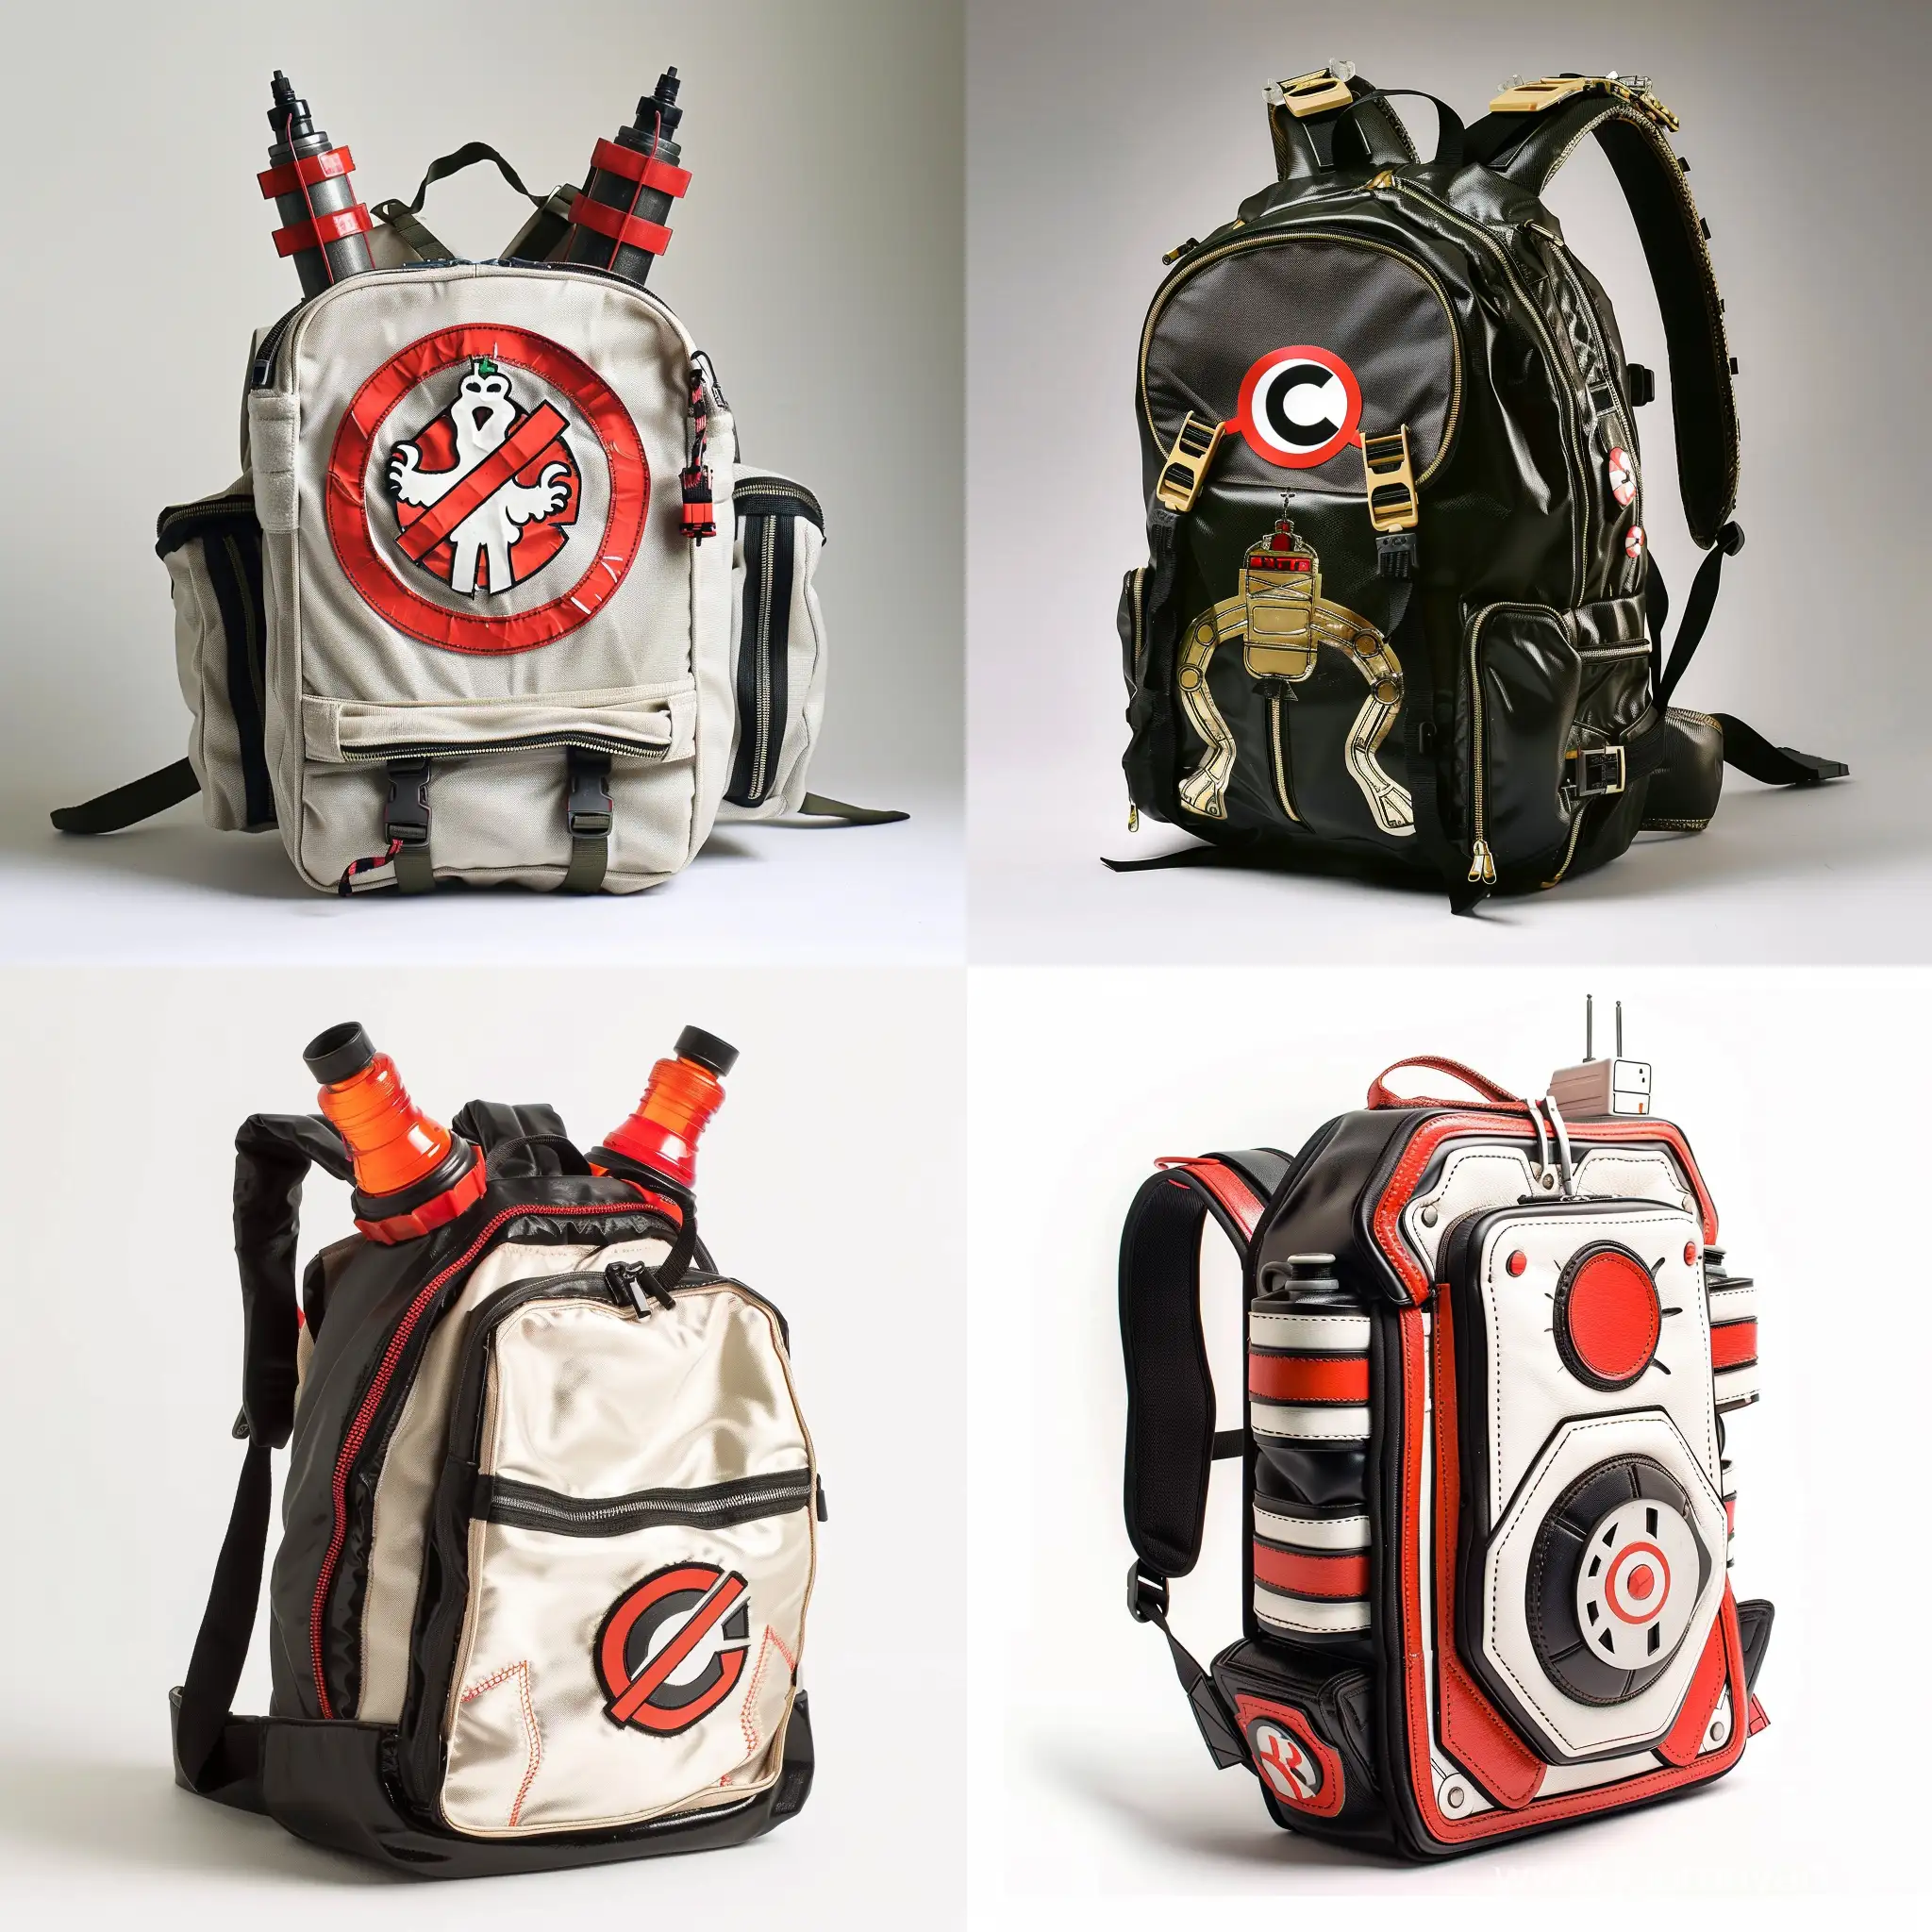 GhostbustersThemed-Backpack-Fun-and-Functional-GhostCapturing-Gear